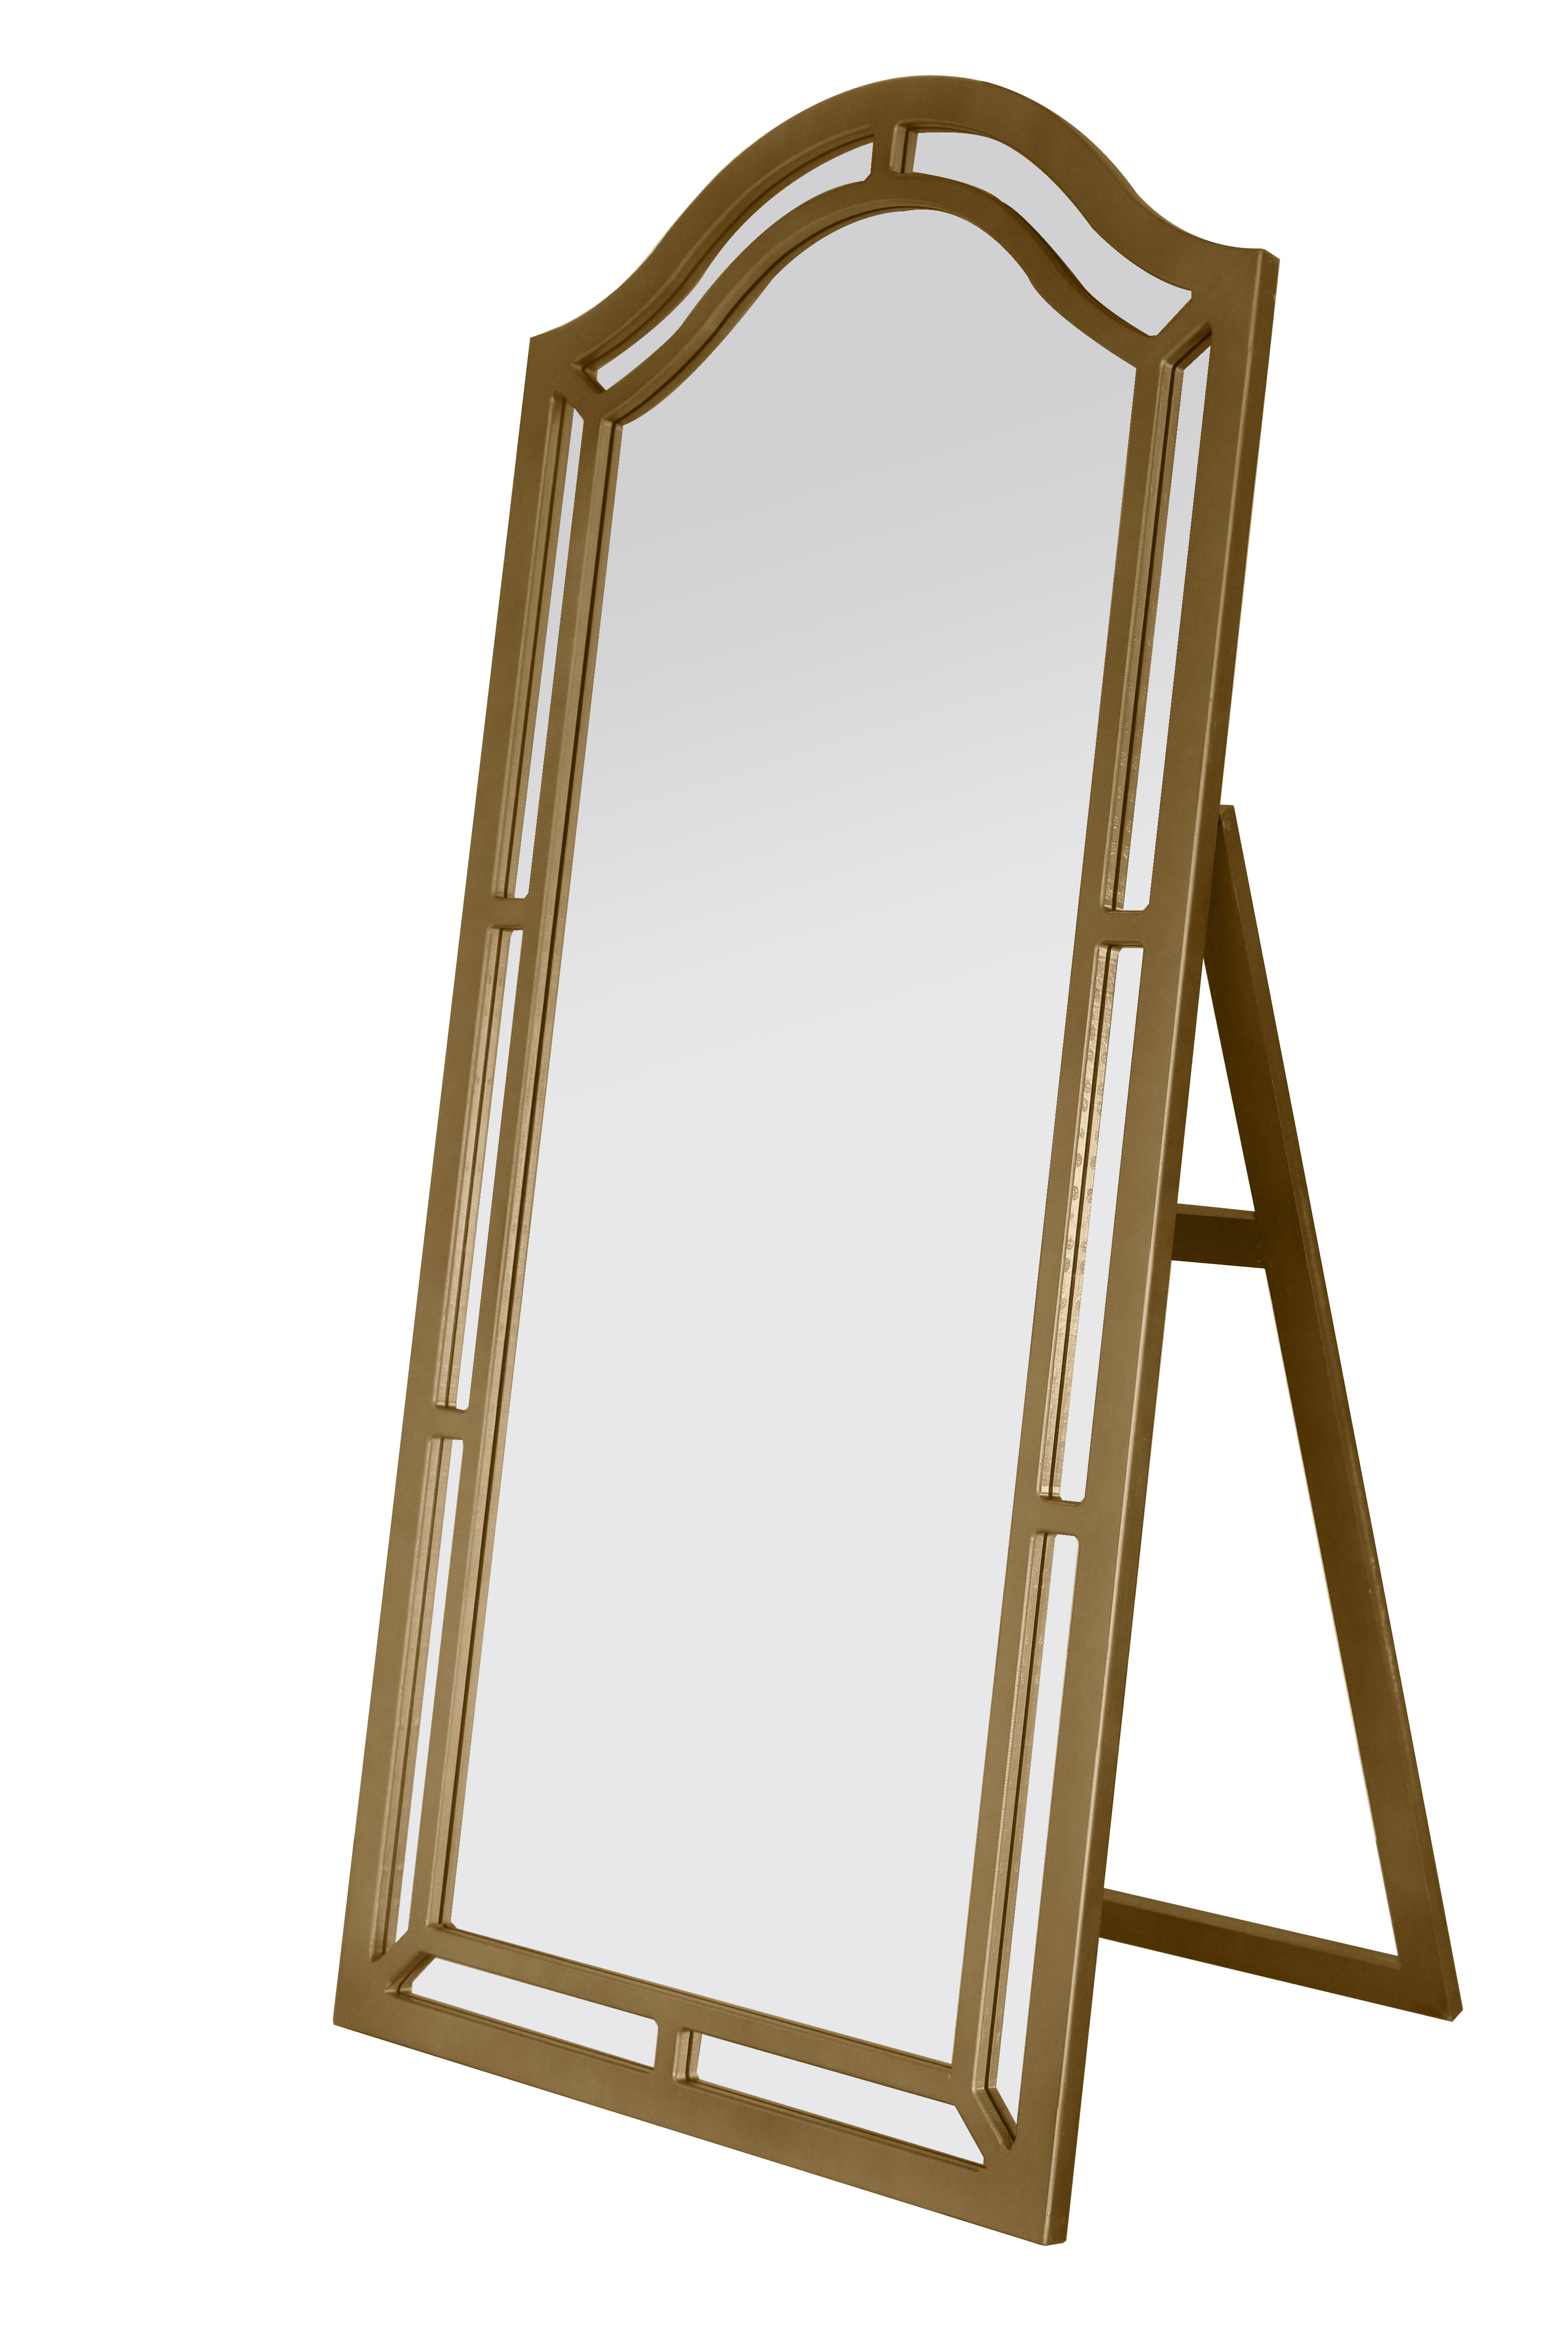 Chic Home Gale Floor Mirror Free Standing Satin Finish